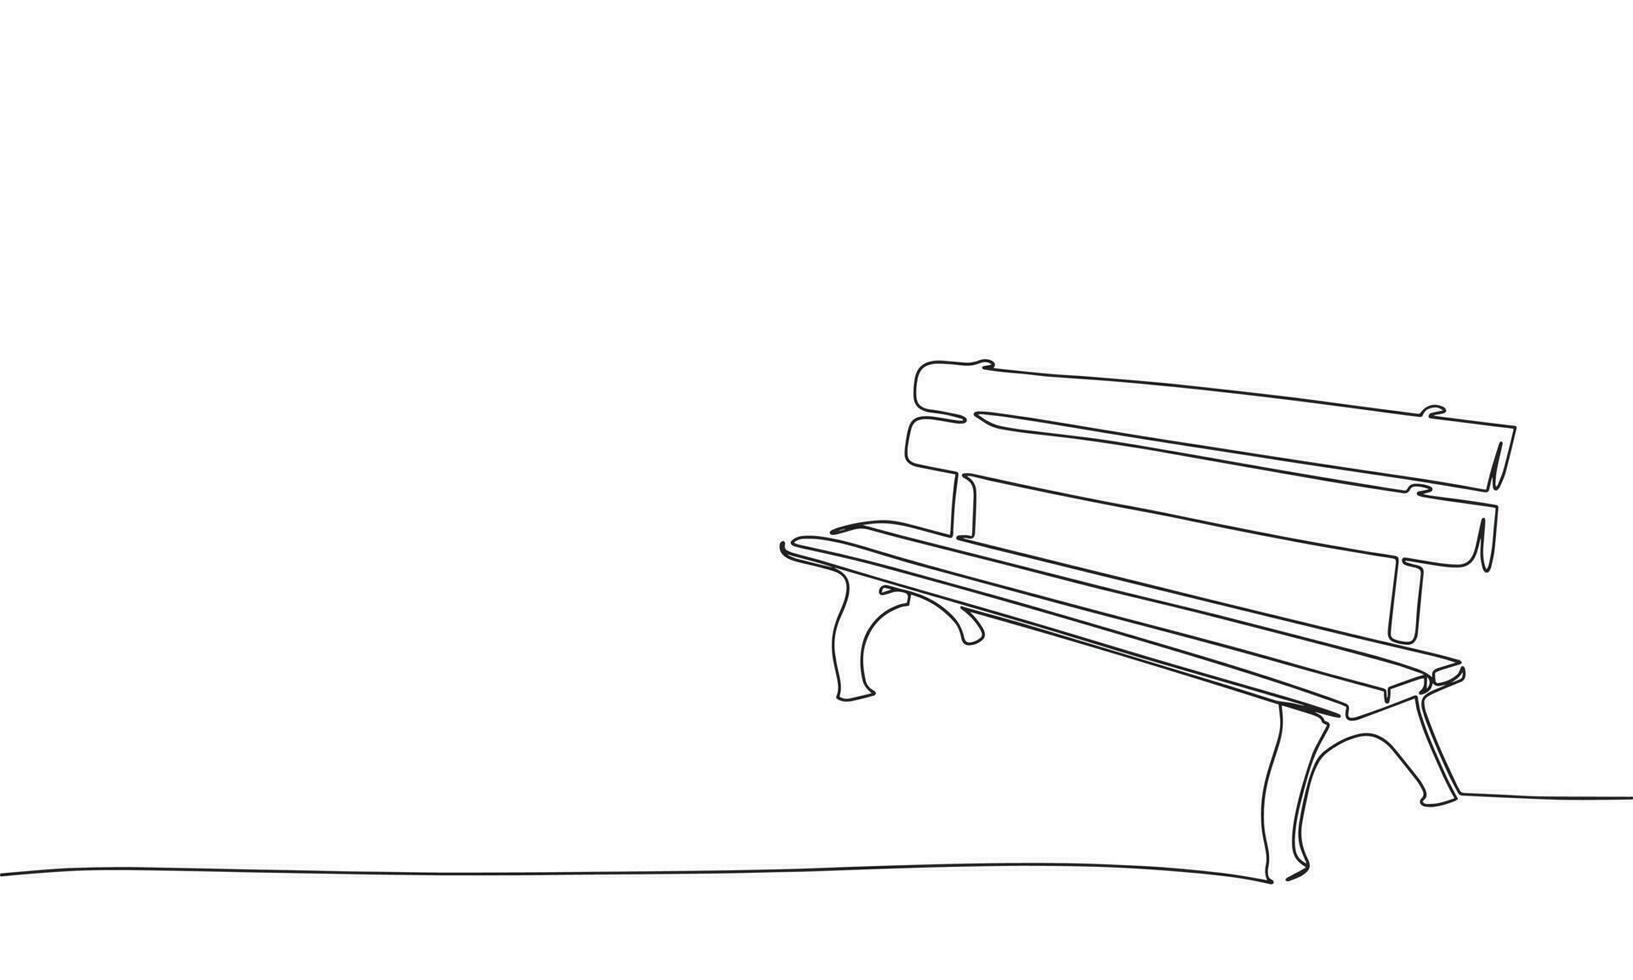 Single bench. One line continuous bench. Line art, outline, single line silhouette. Hand drawn vector illustration.